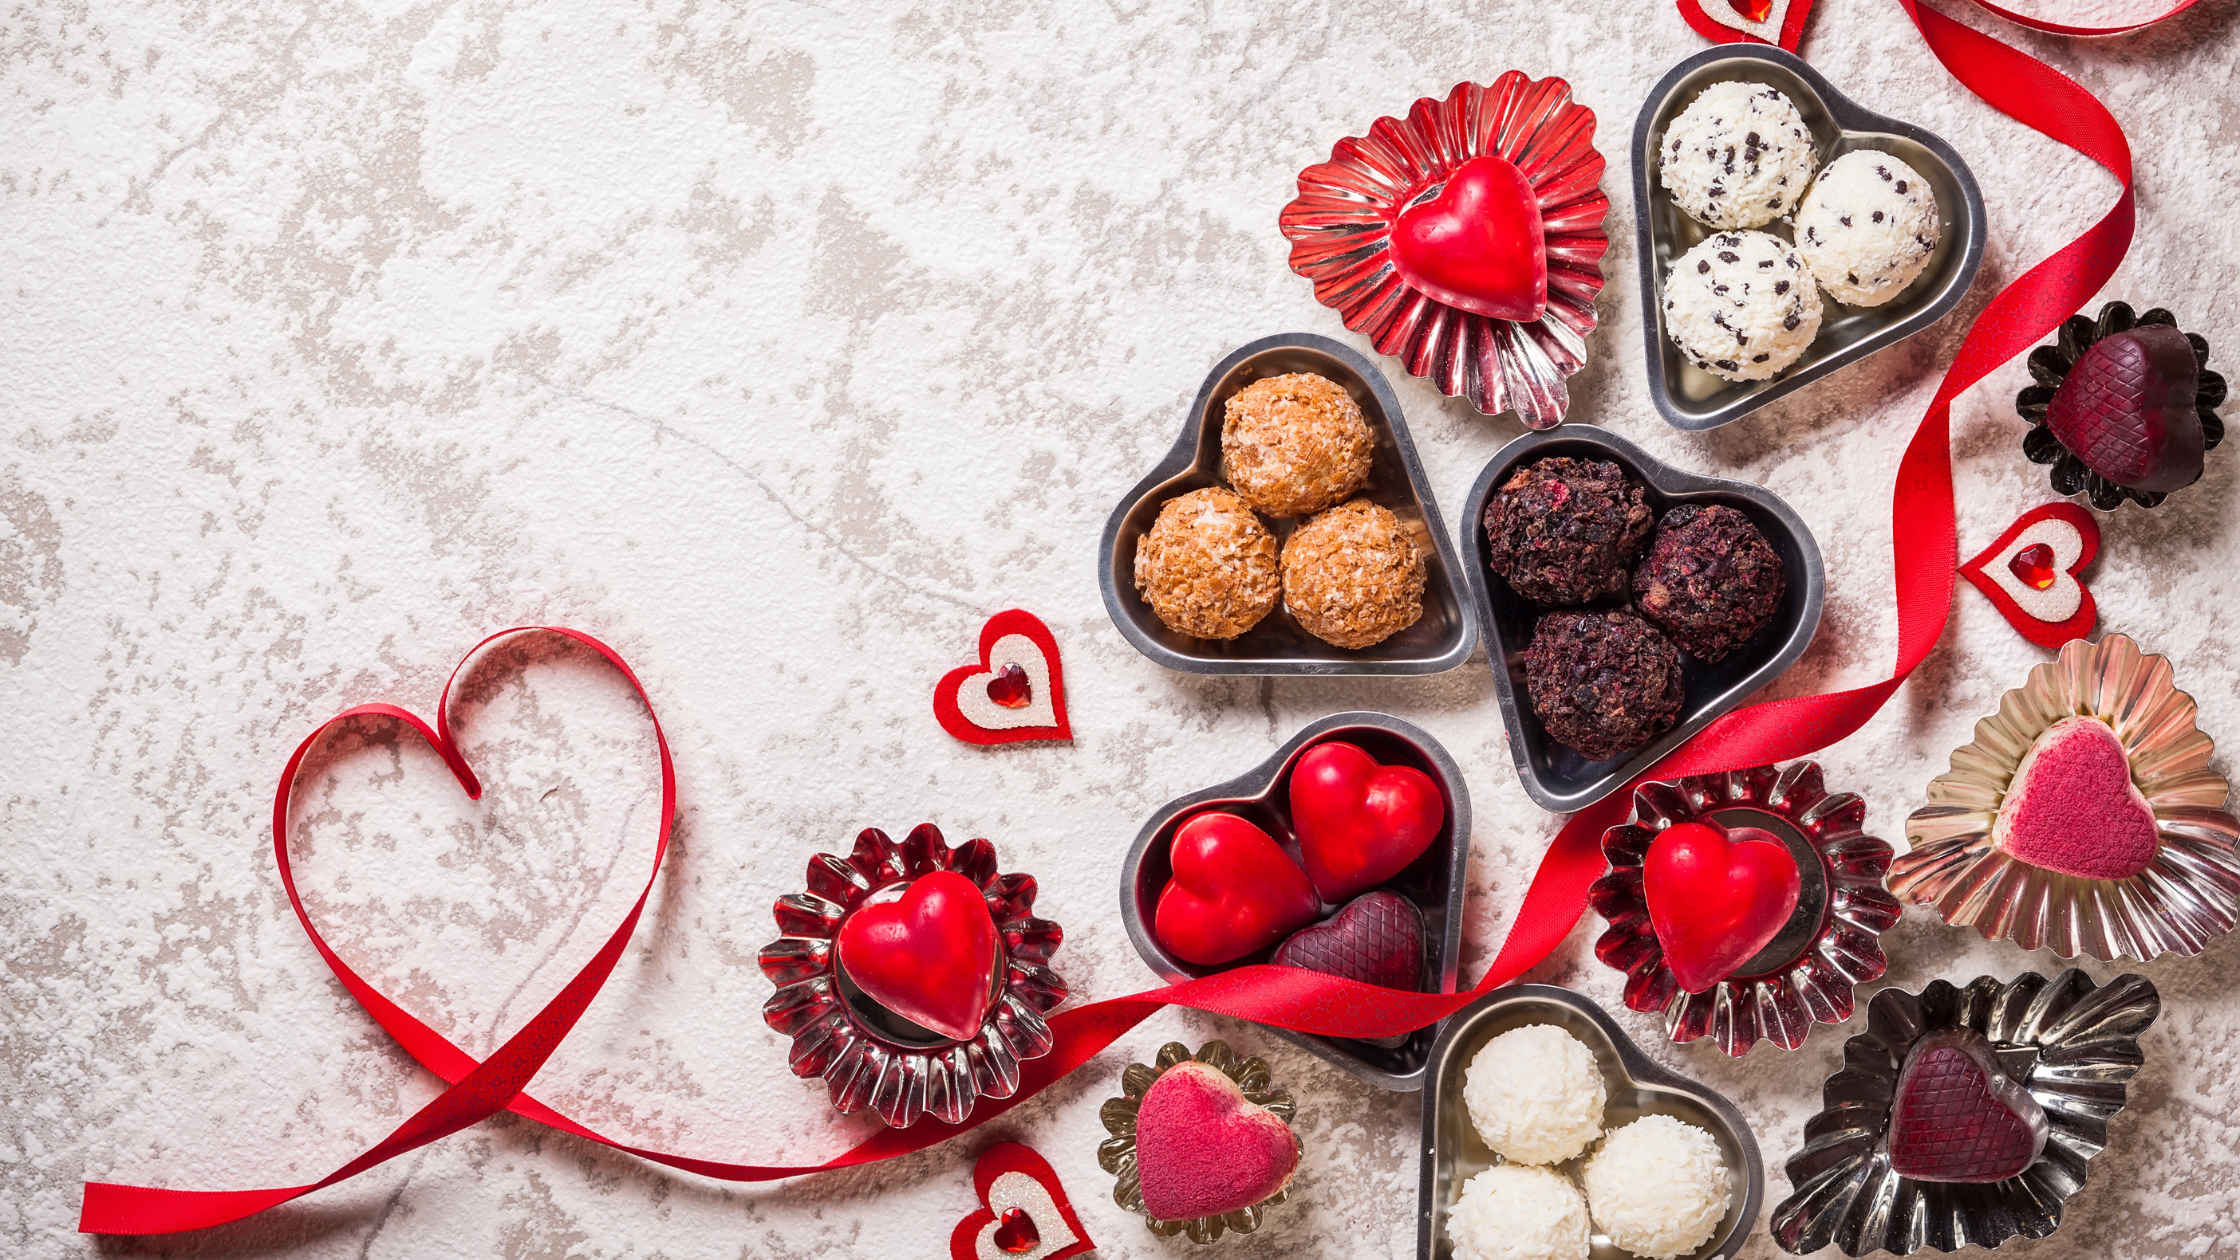 Healthy Chocolate Recipes for a Responsibly Sweet Valentine's Day